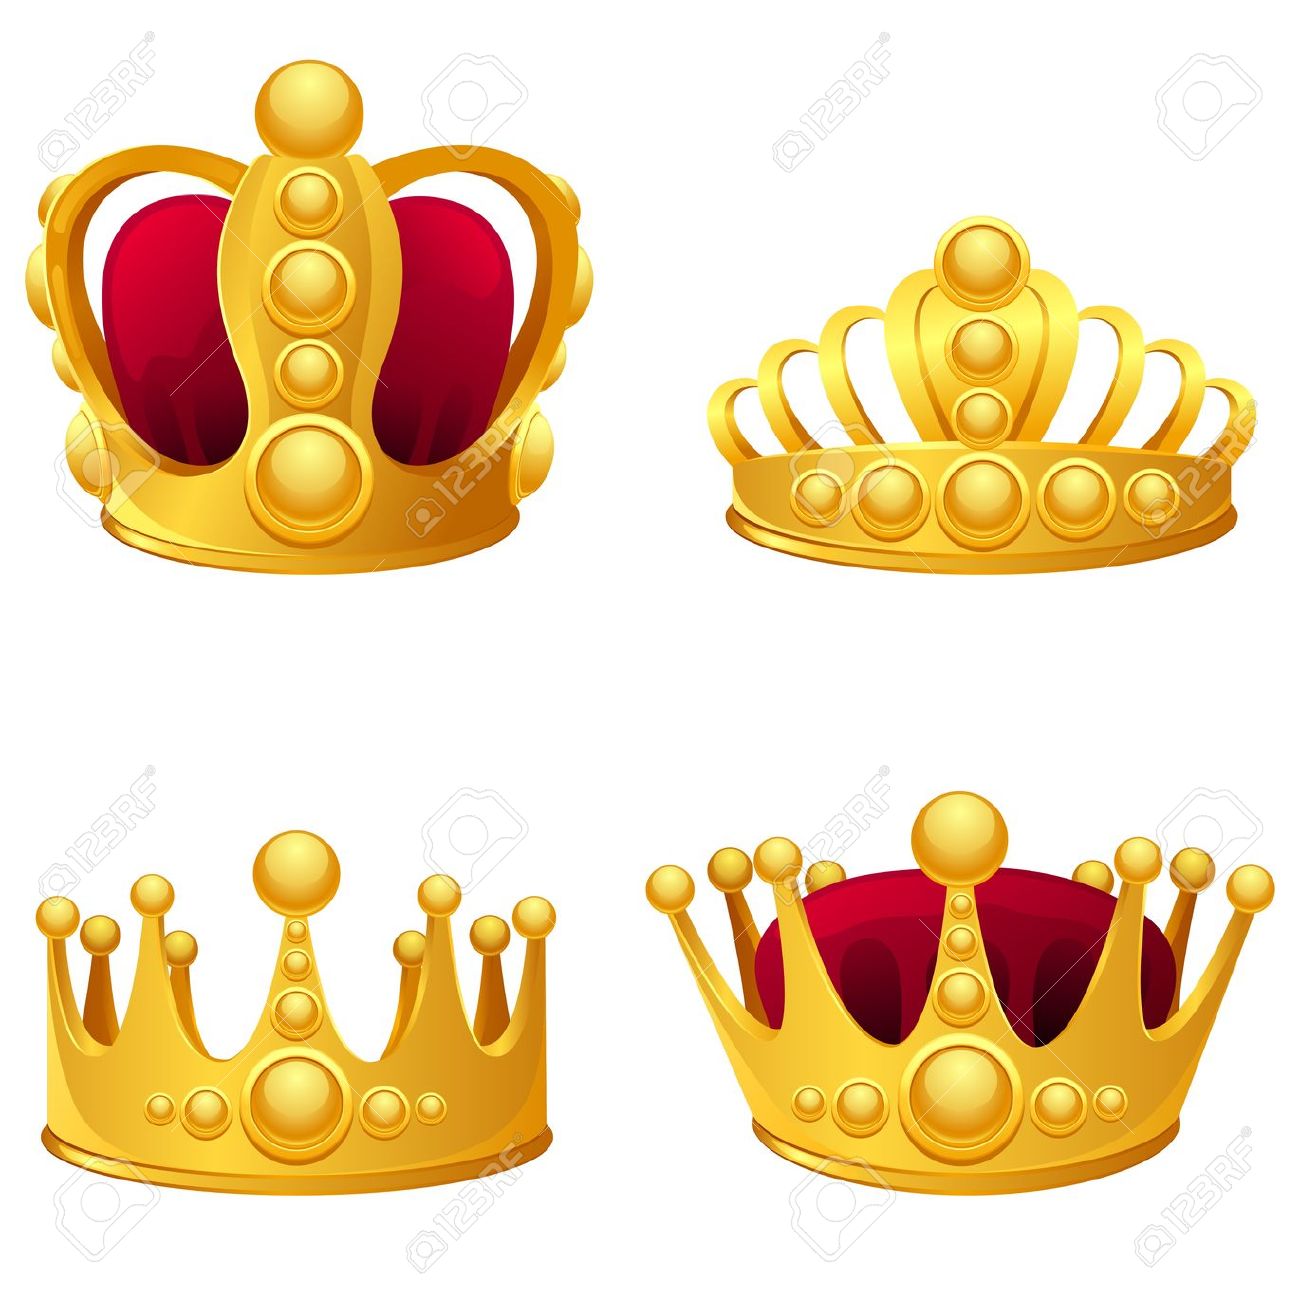 King and queen crown clipart